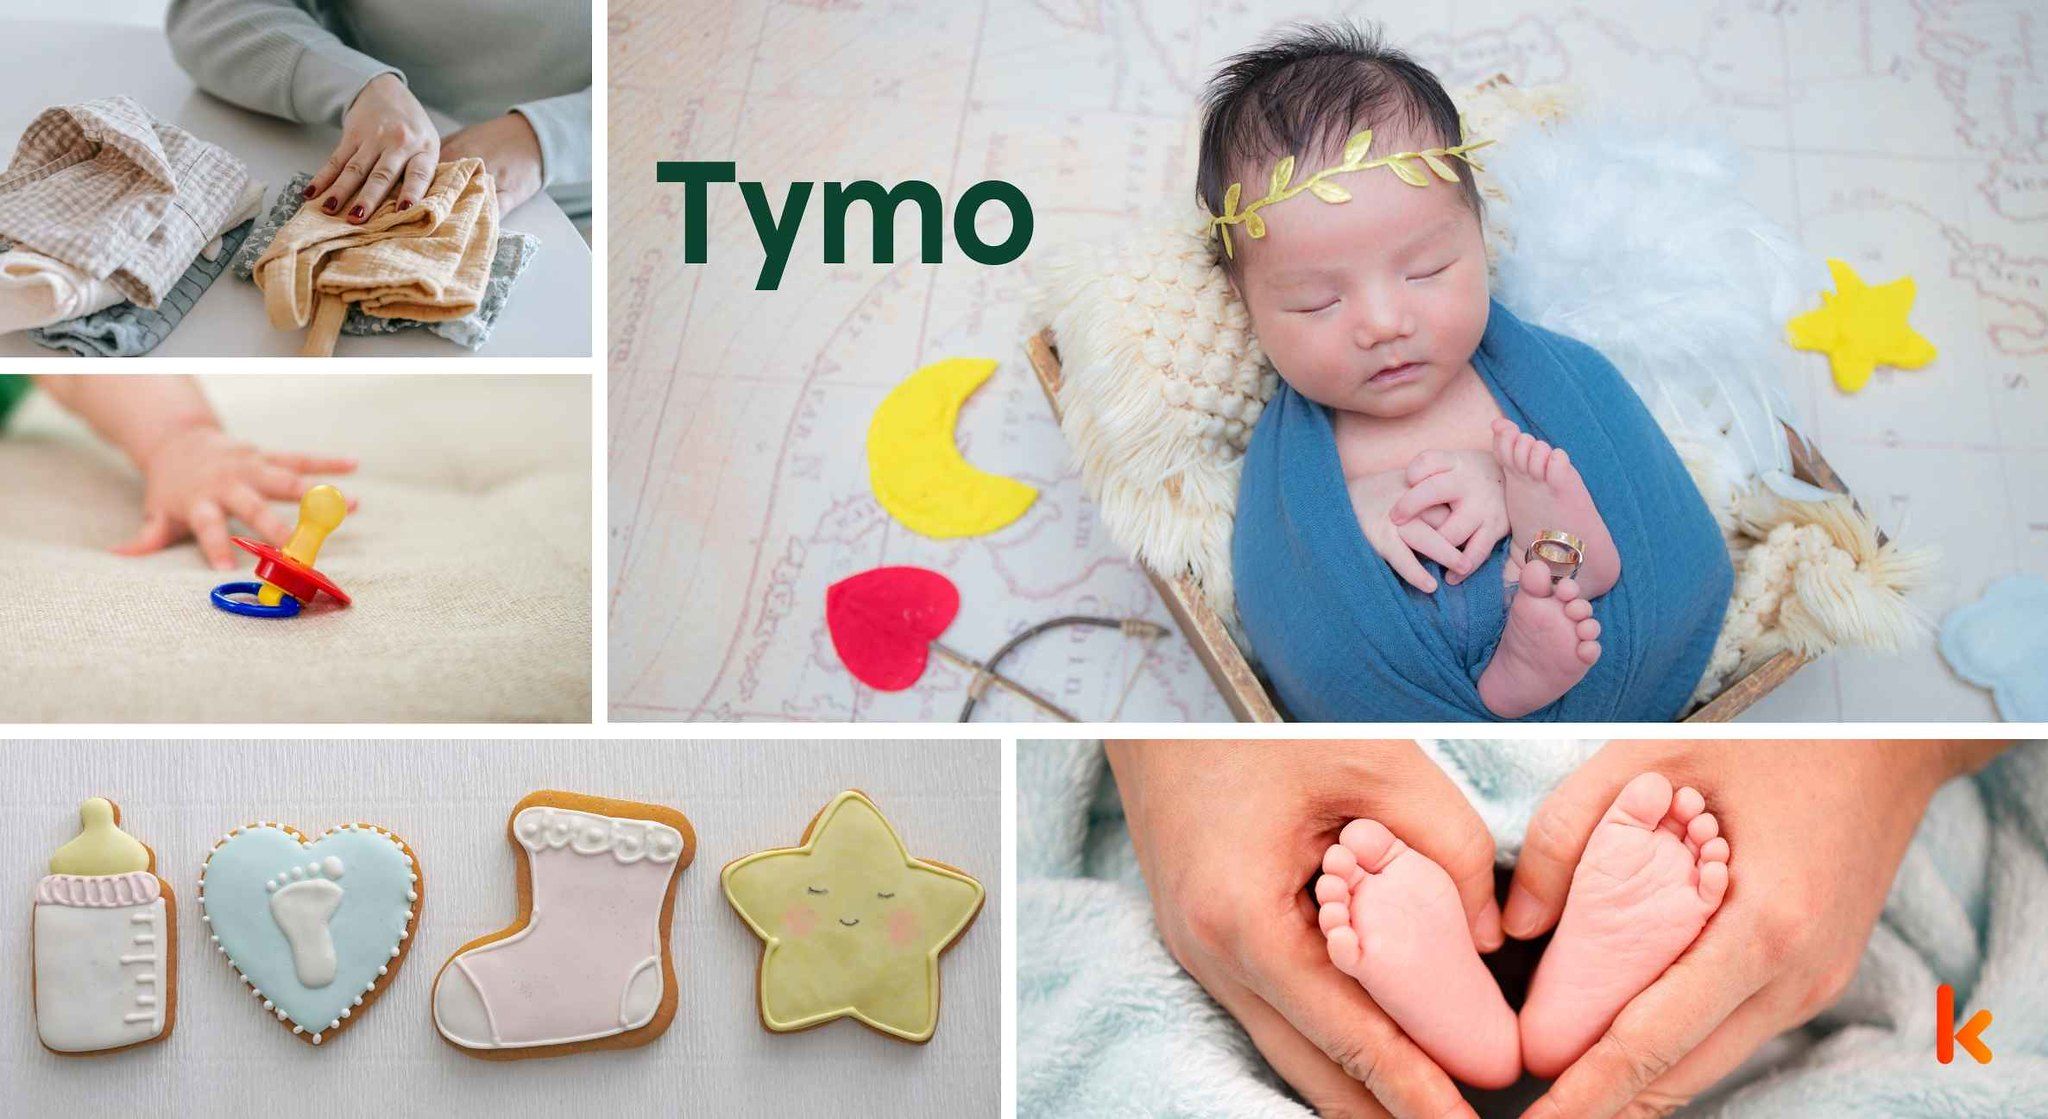 Meaning of the name Tymo